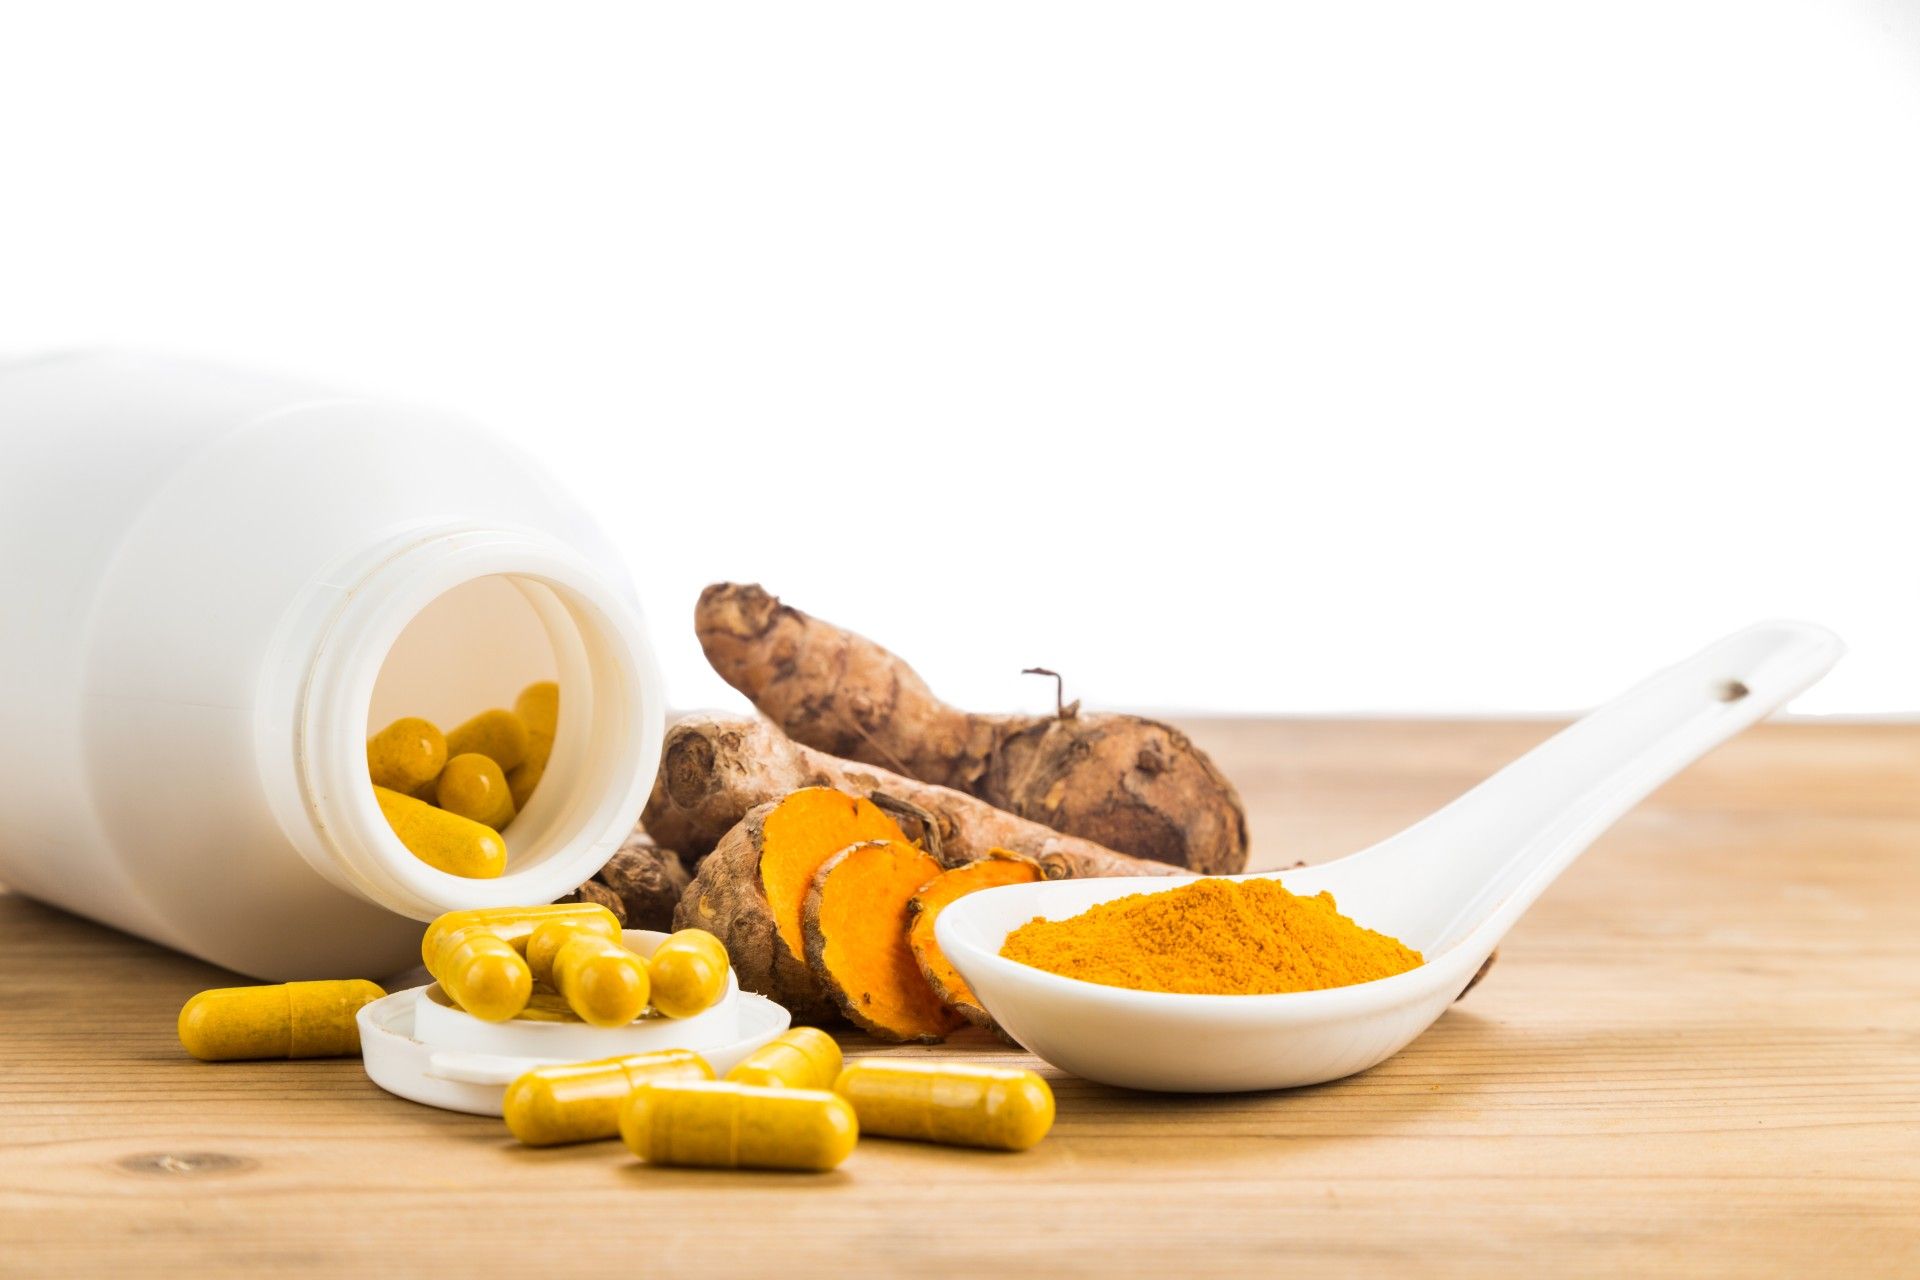 Powdered turmeric in a spoon next to whole turmeric and turmeric pills - pain relief